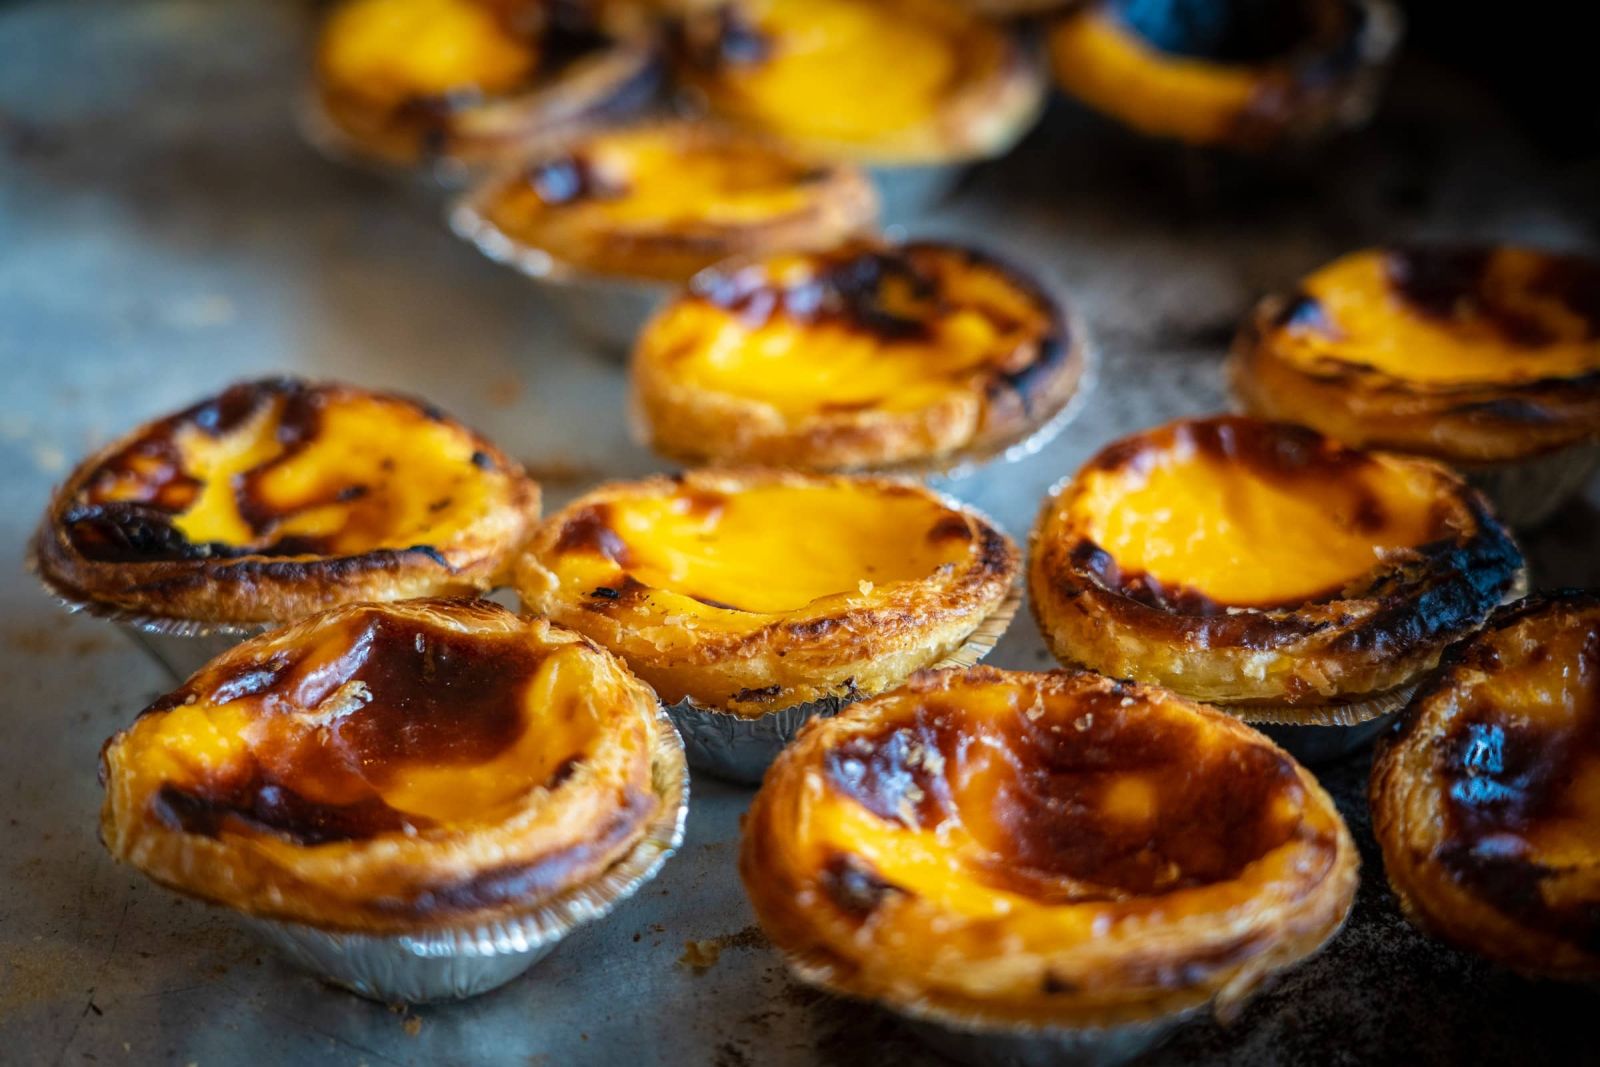 Delight your taste buds in historic Portuguese Pastries